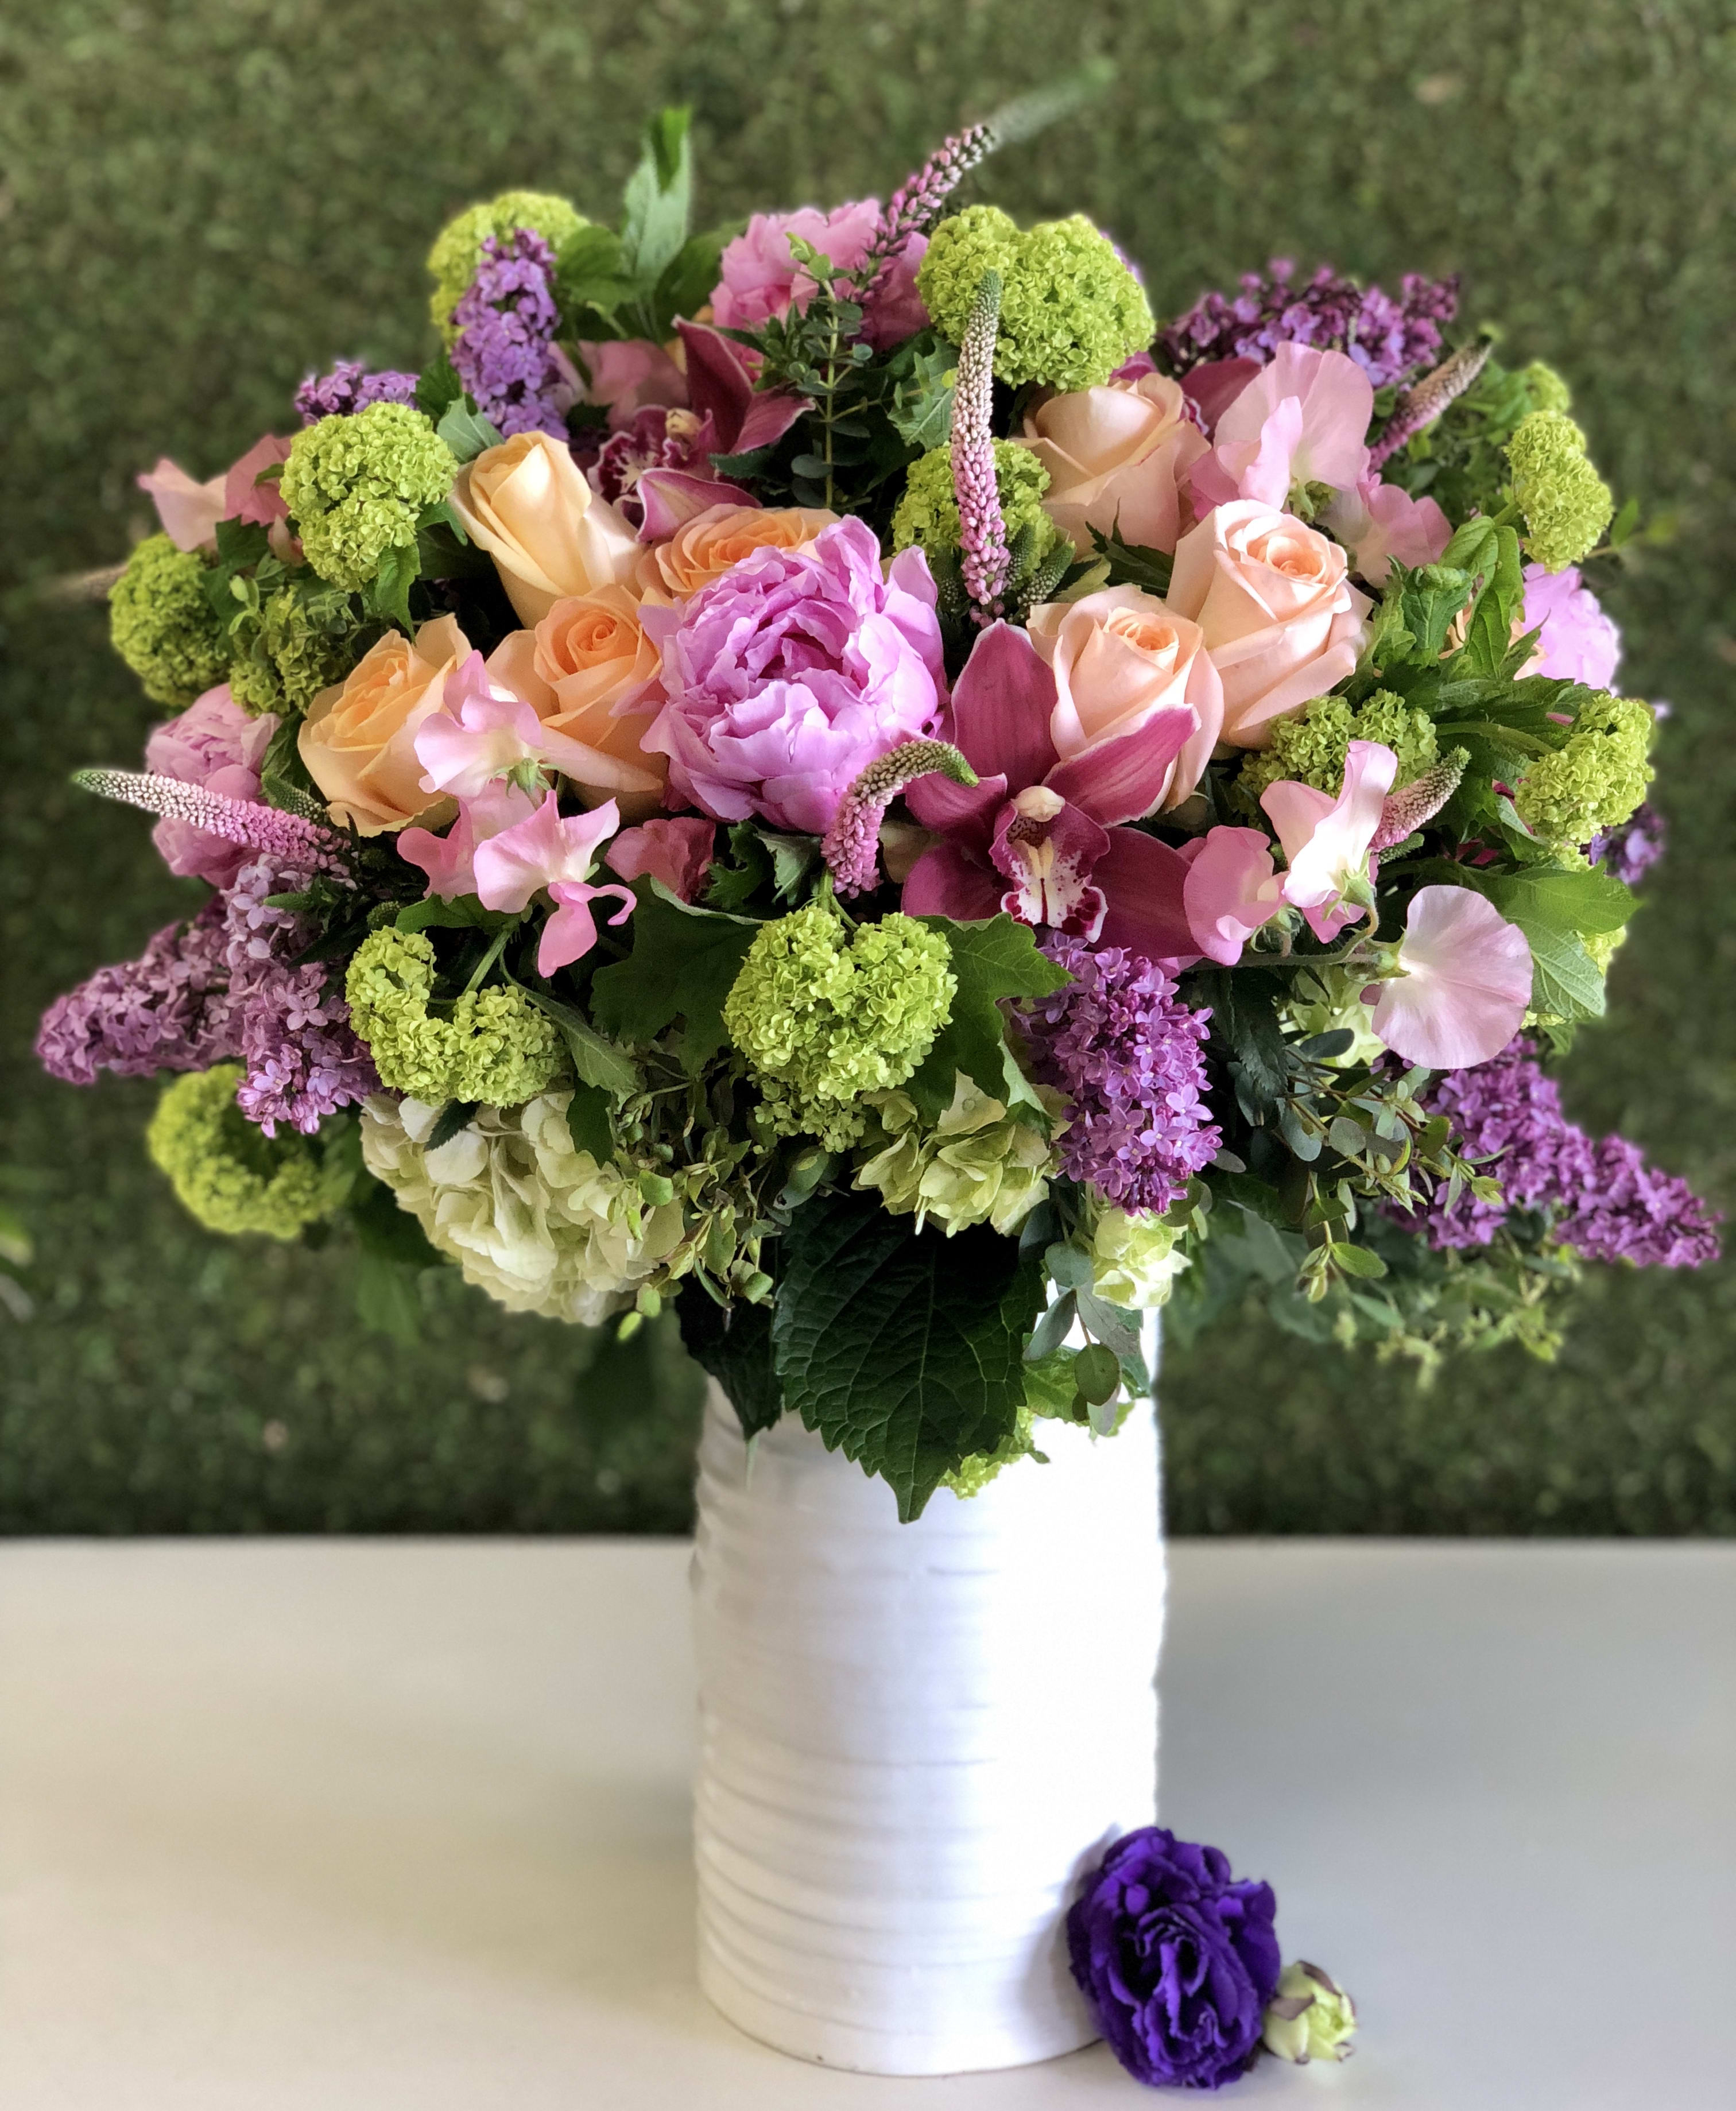 Georgina - Extravagant Design with Peonies, Roses and more in Torrance ...